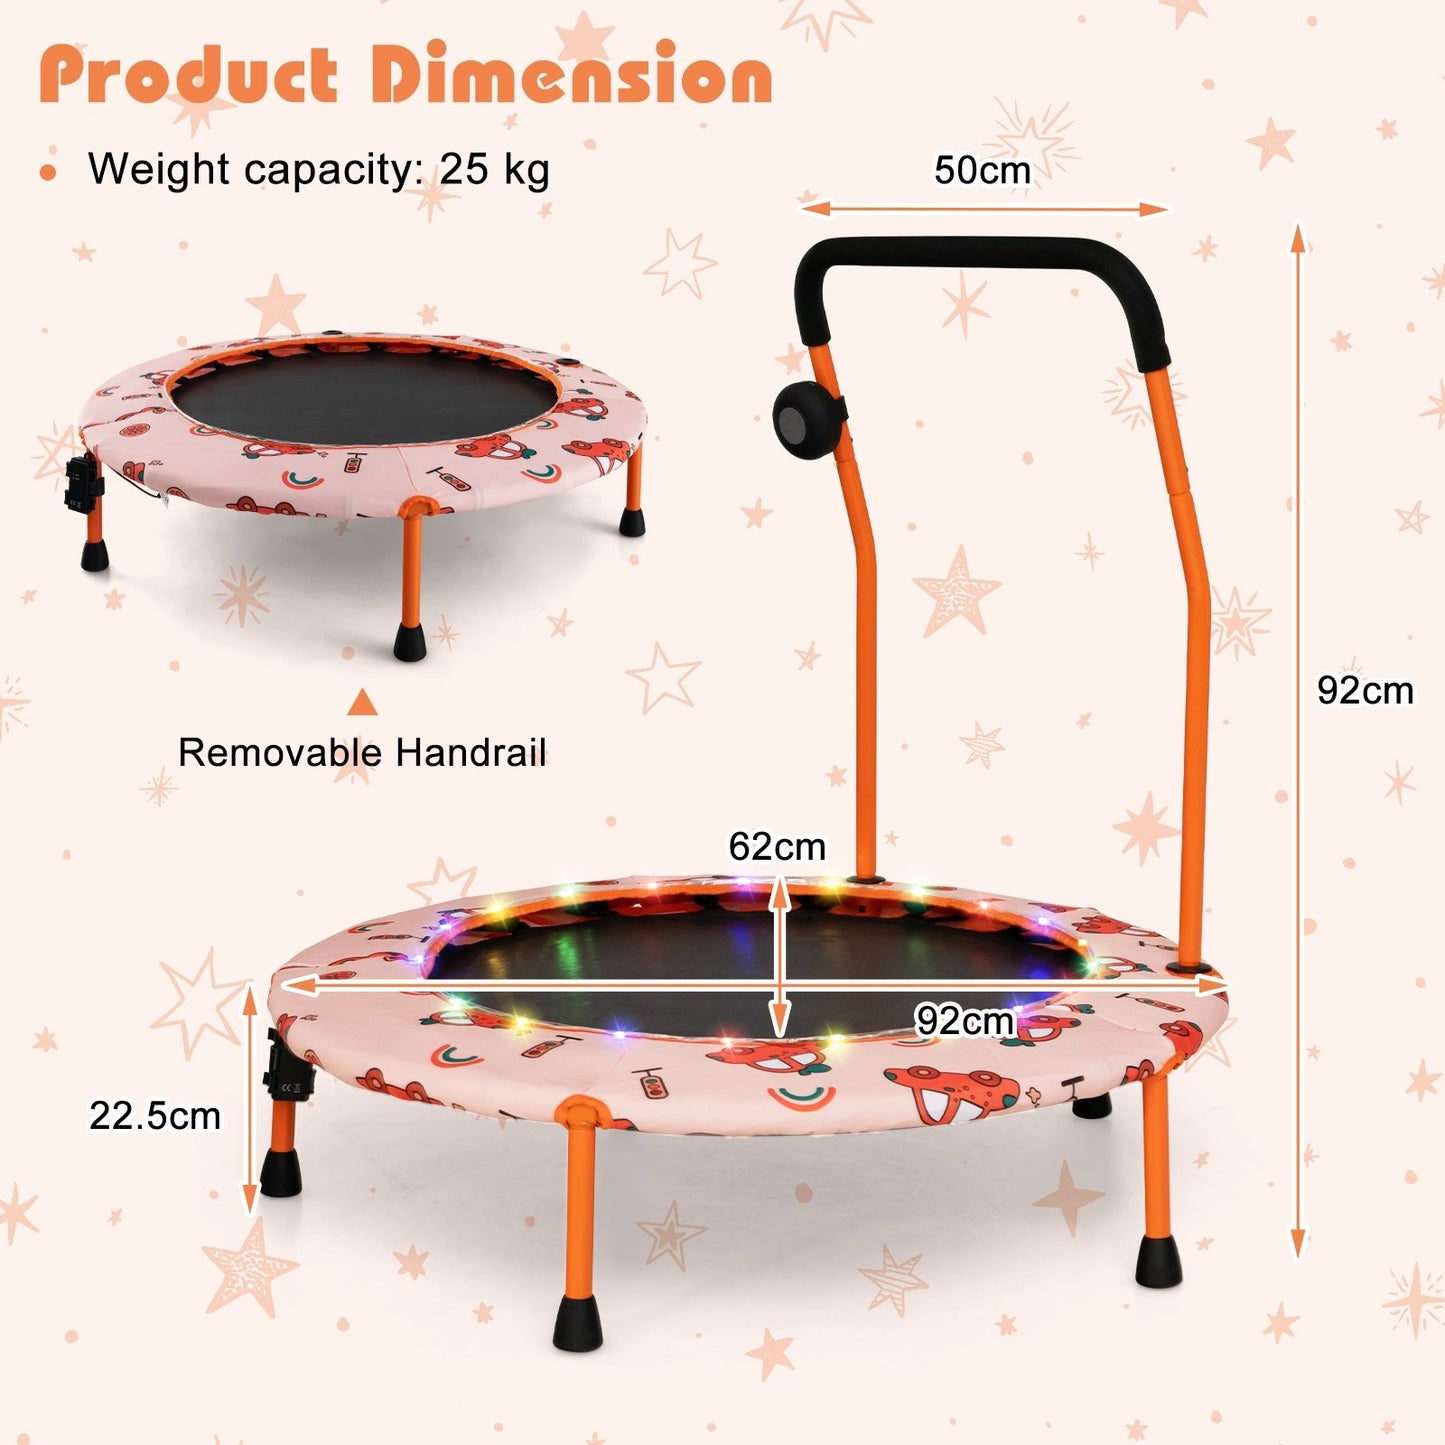 36 Inch Mini Trampoline with Colorful LED Lights and Bluetooth Speaker, Orange